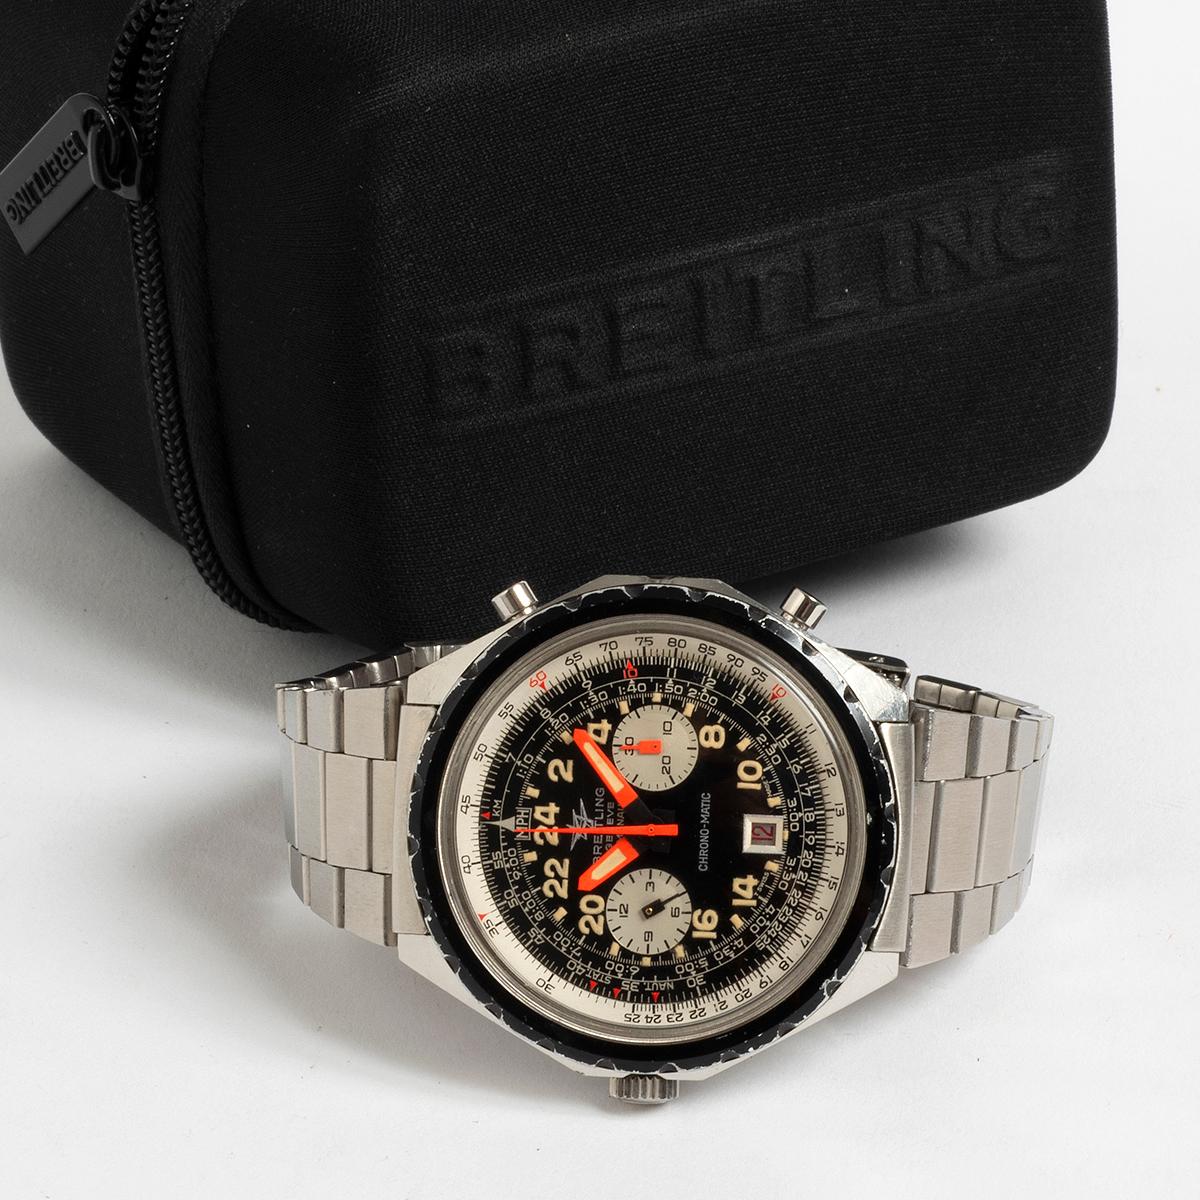 Breitling Cosmonaute Chrono-matic Wristwatch 1809, Call 11, 48mm Case. c1970. For Sale 1